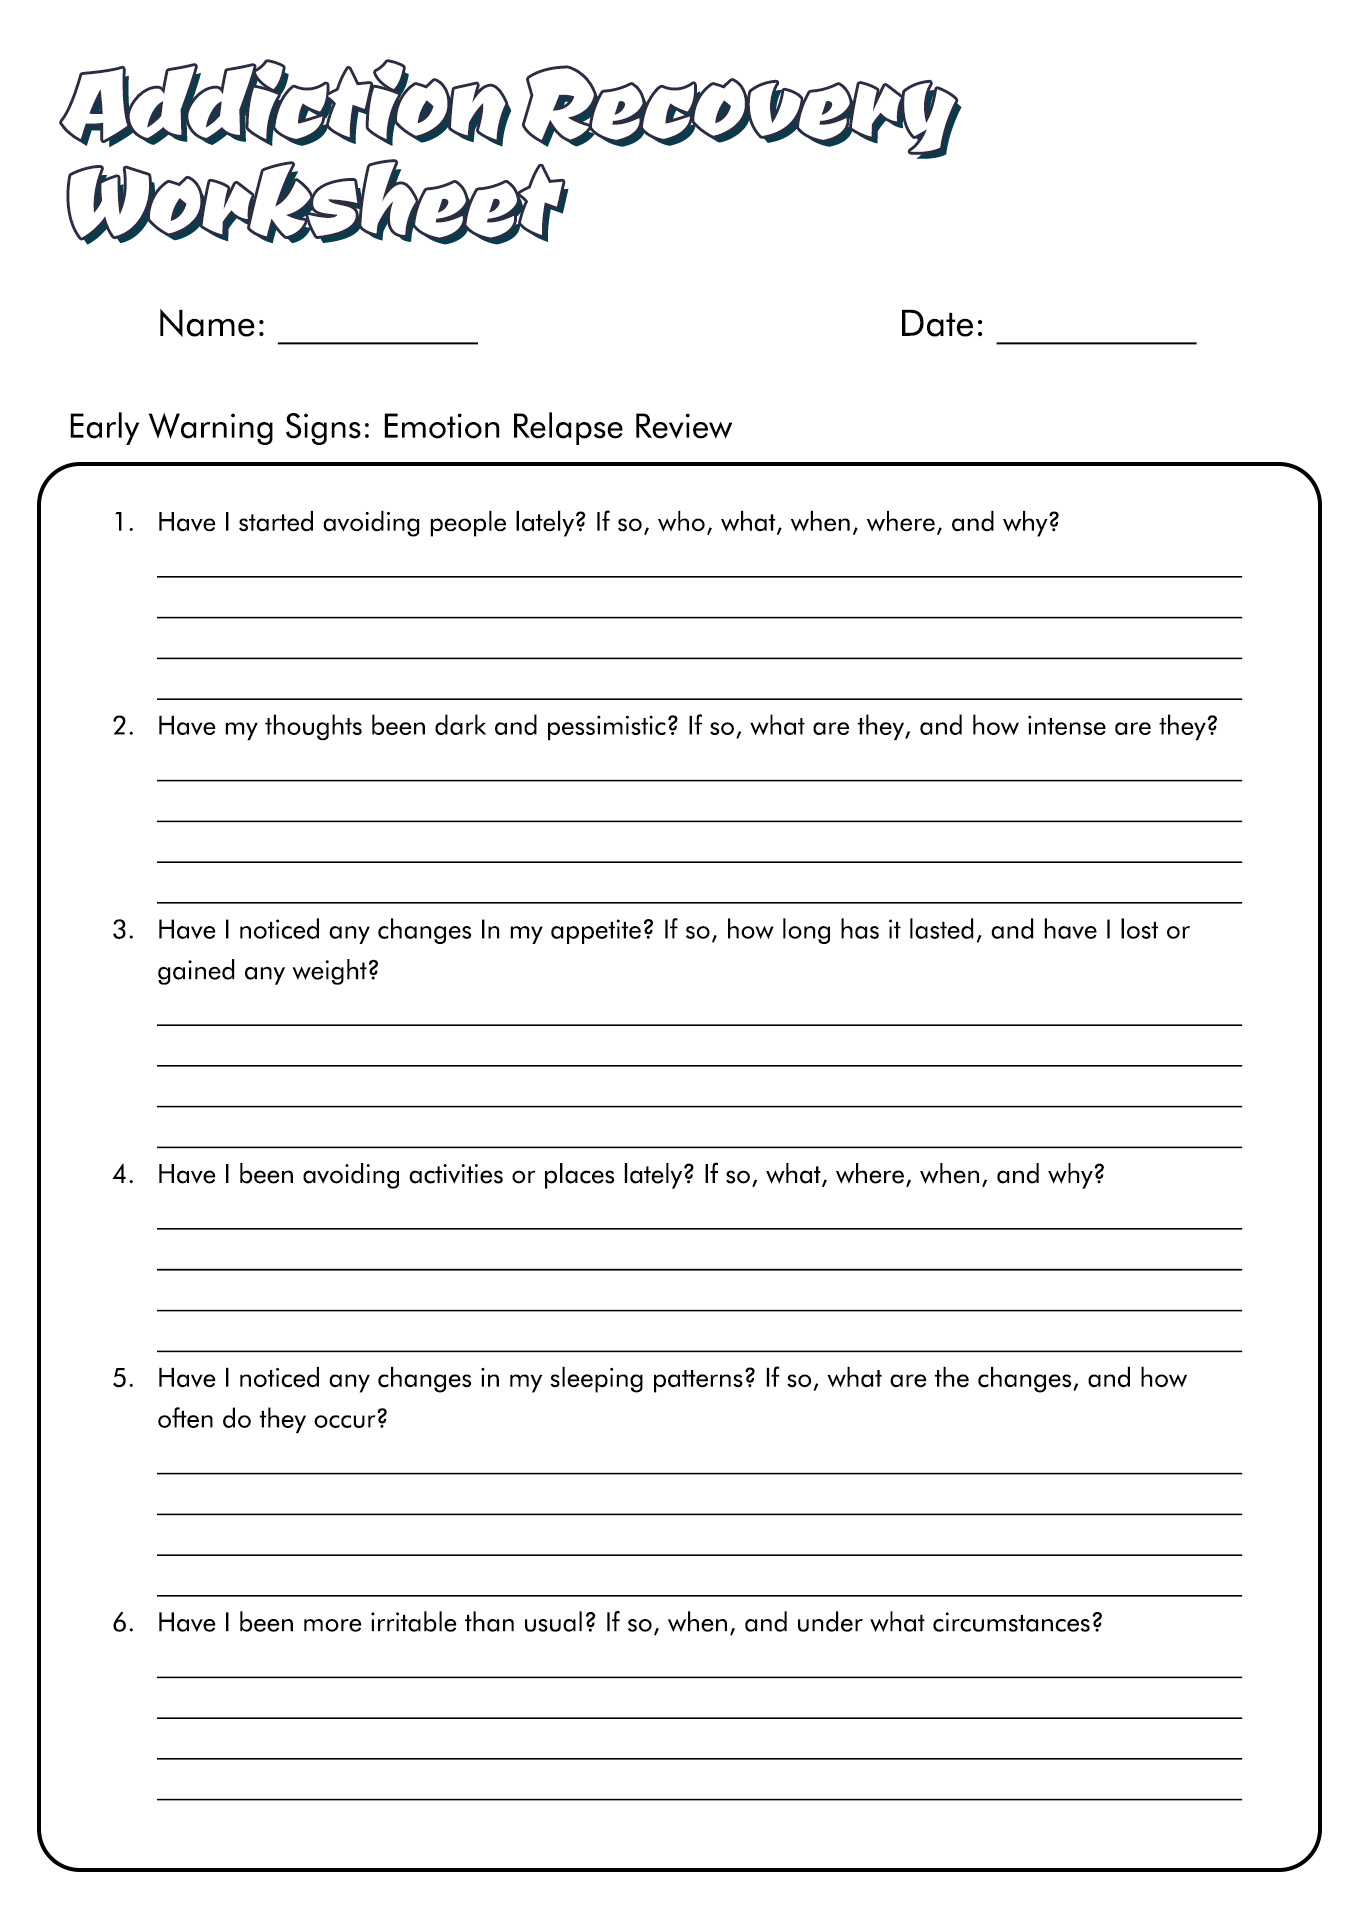 15-best-images-of-12-step-recovery-worksheets-narcotics-anonymous-12